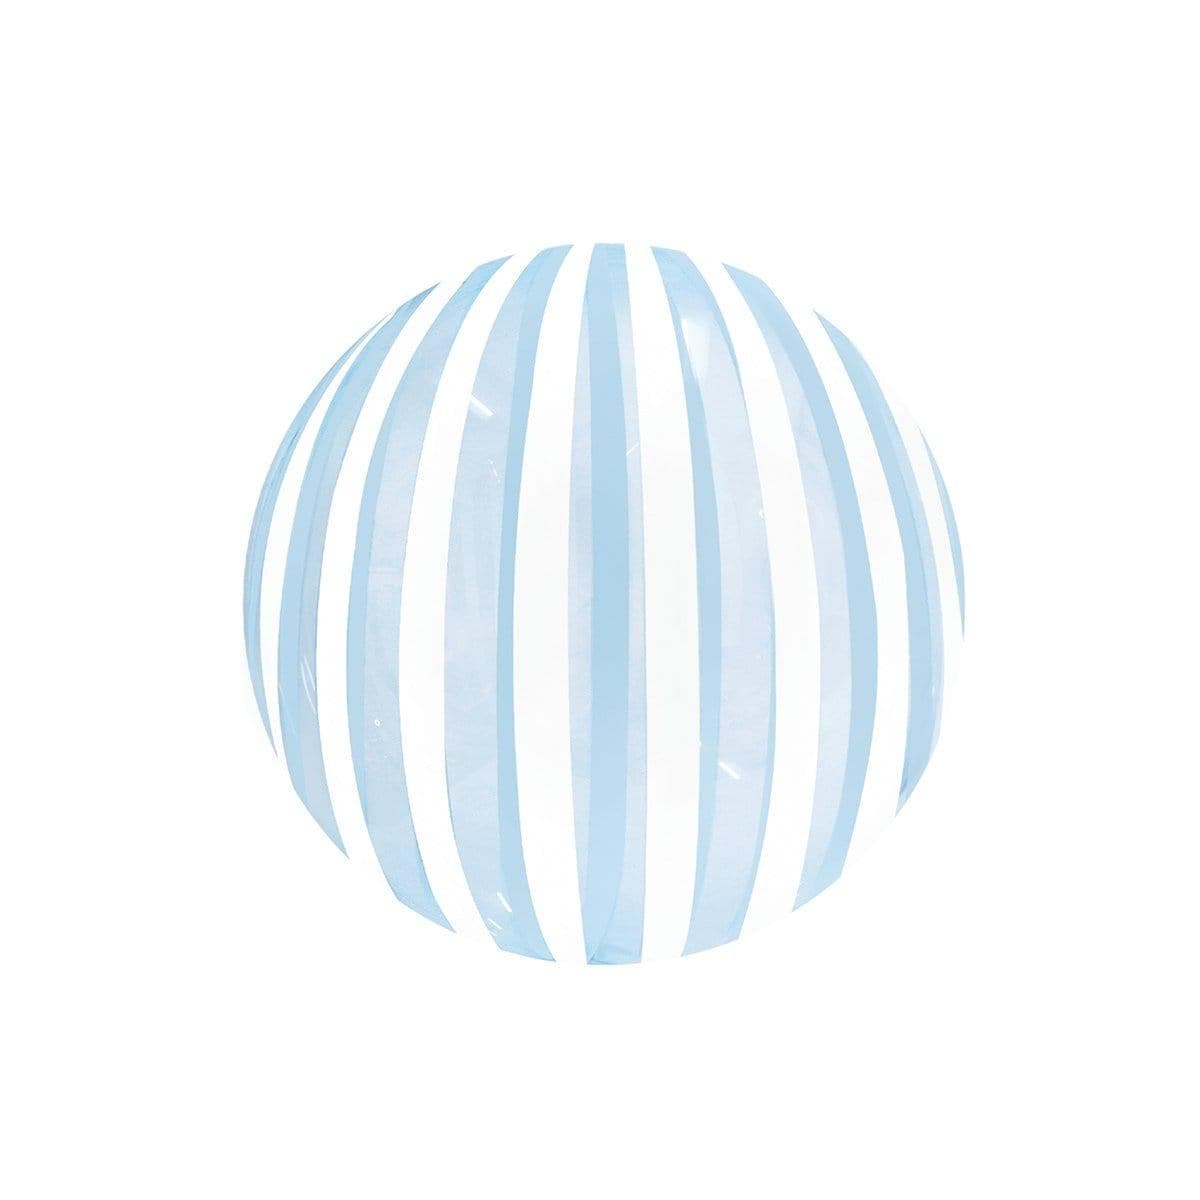 Buy Balloons Stripe Bubble Balloon, Blue & White, 18 Inches sold at Party Expert